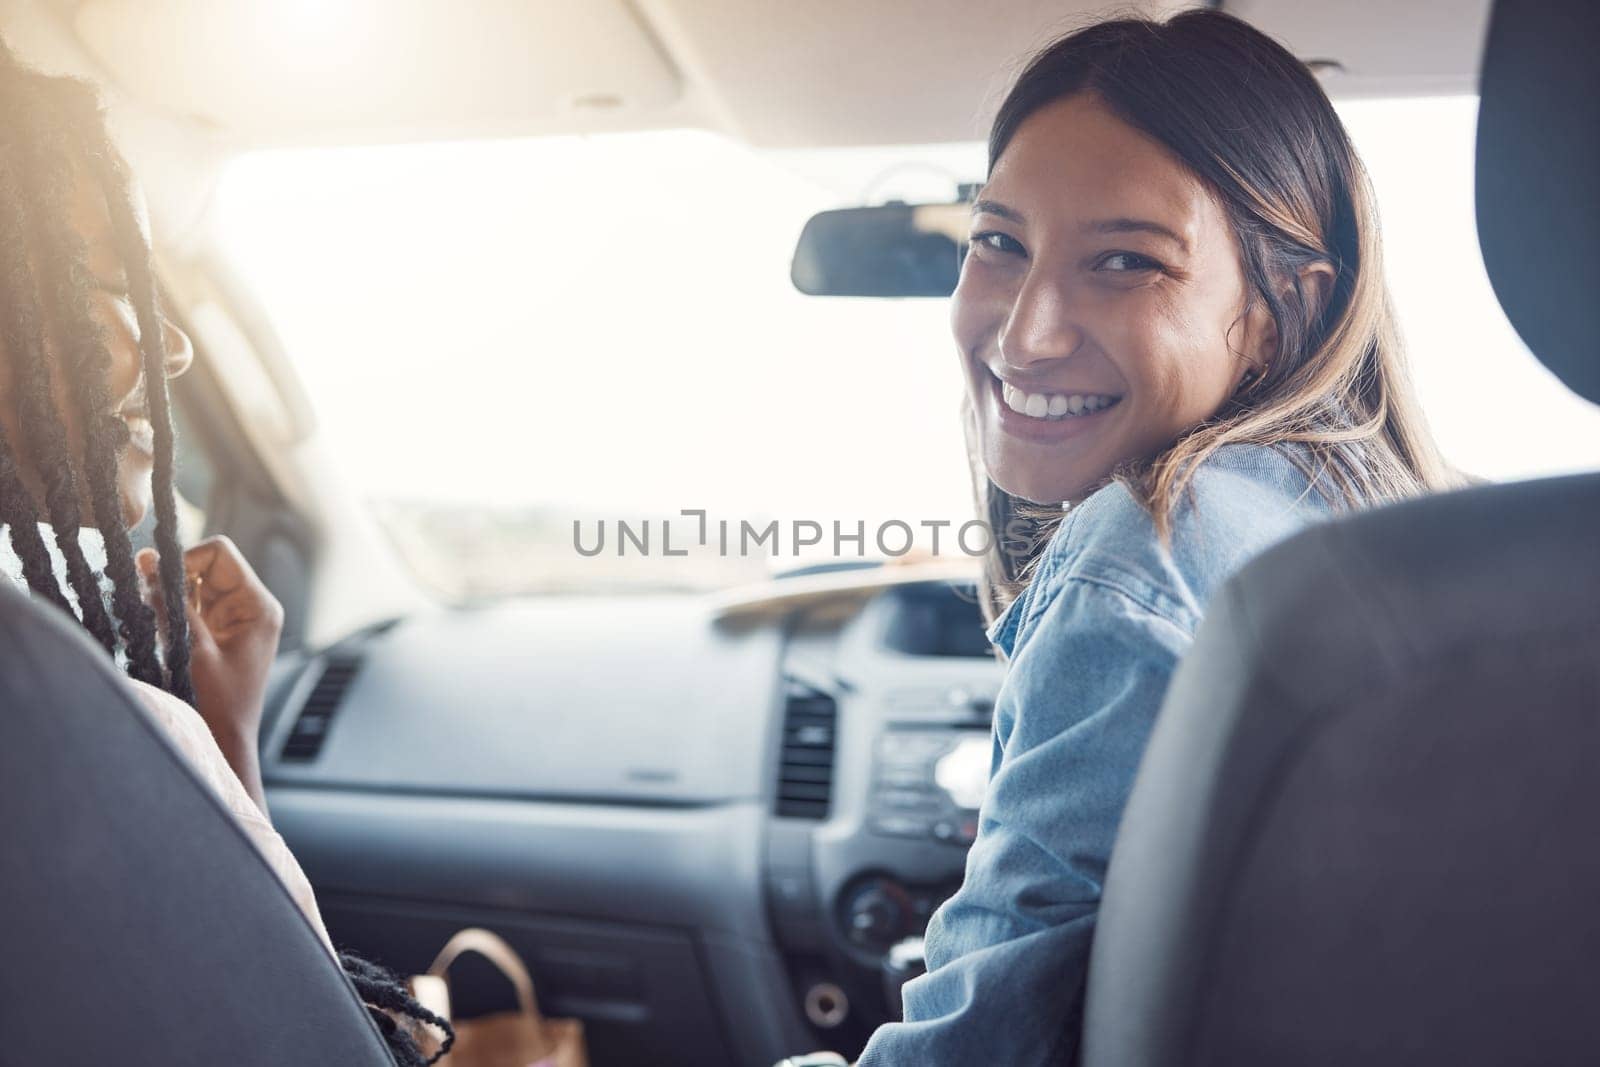 Car road trip, happy portrait and woman relax on travel adventure for peace, wellness and outdoor freedom, Summer safari holiday, driving van and fun friends smile on Australia transportation journey by YuriArcurs